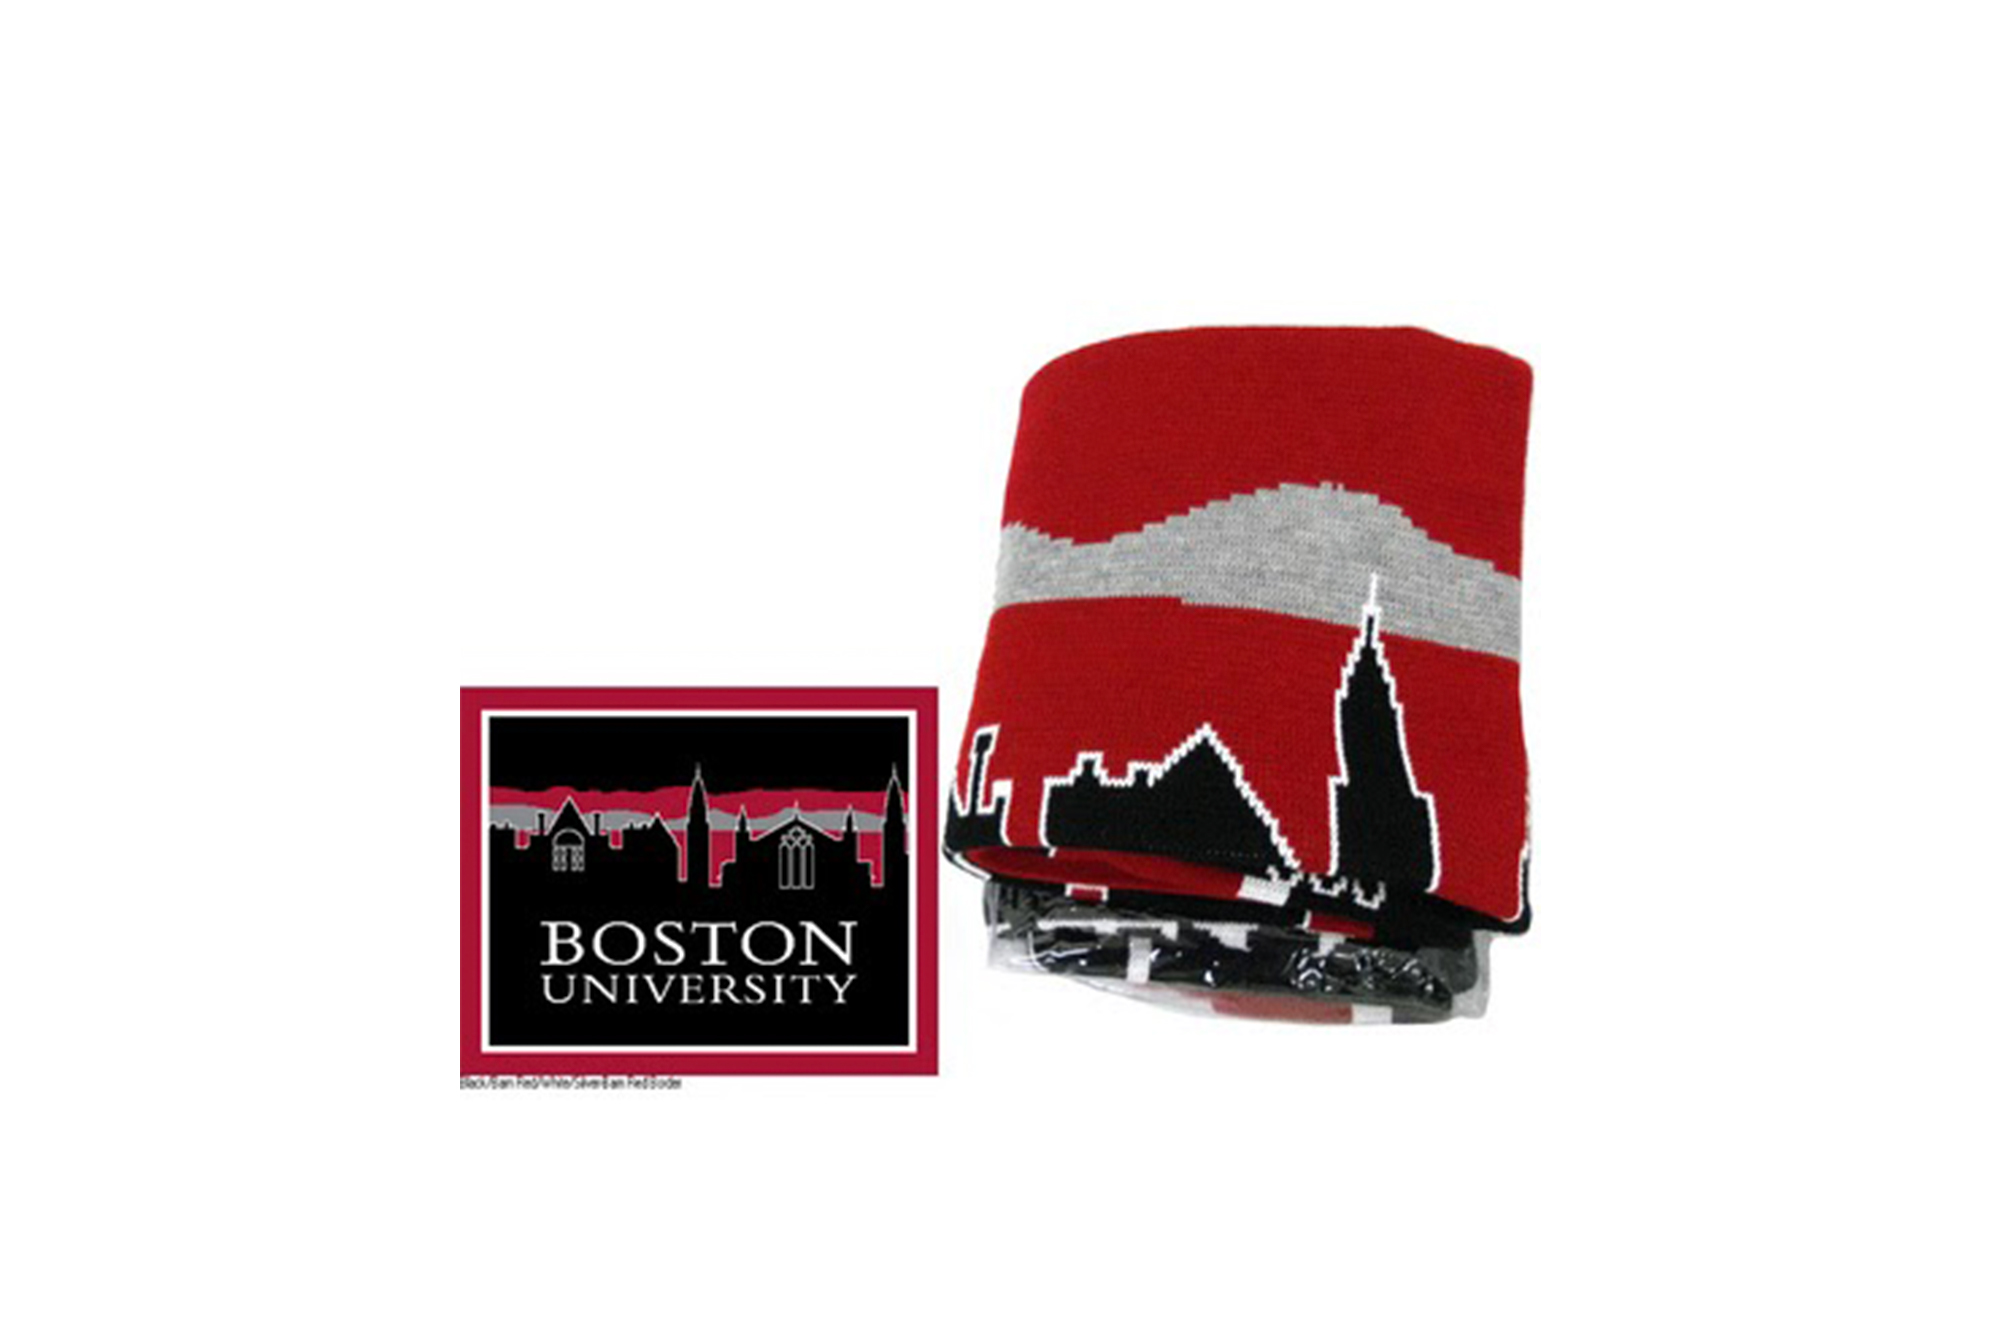 Photo of Uscape Knit BU Blanket. Folded blanket is seen right, on left is image of full blanket which reads "Boston University" and shows BU's Marsh Chapel in black, red and gray.